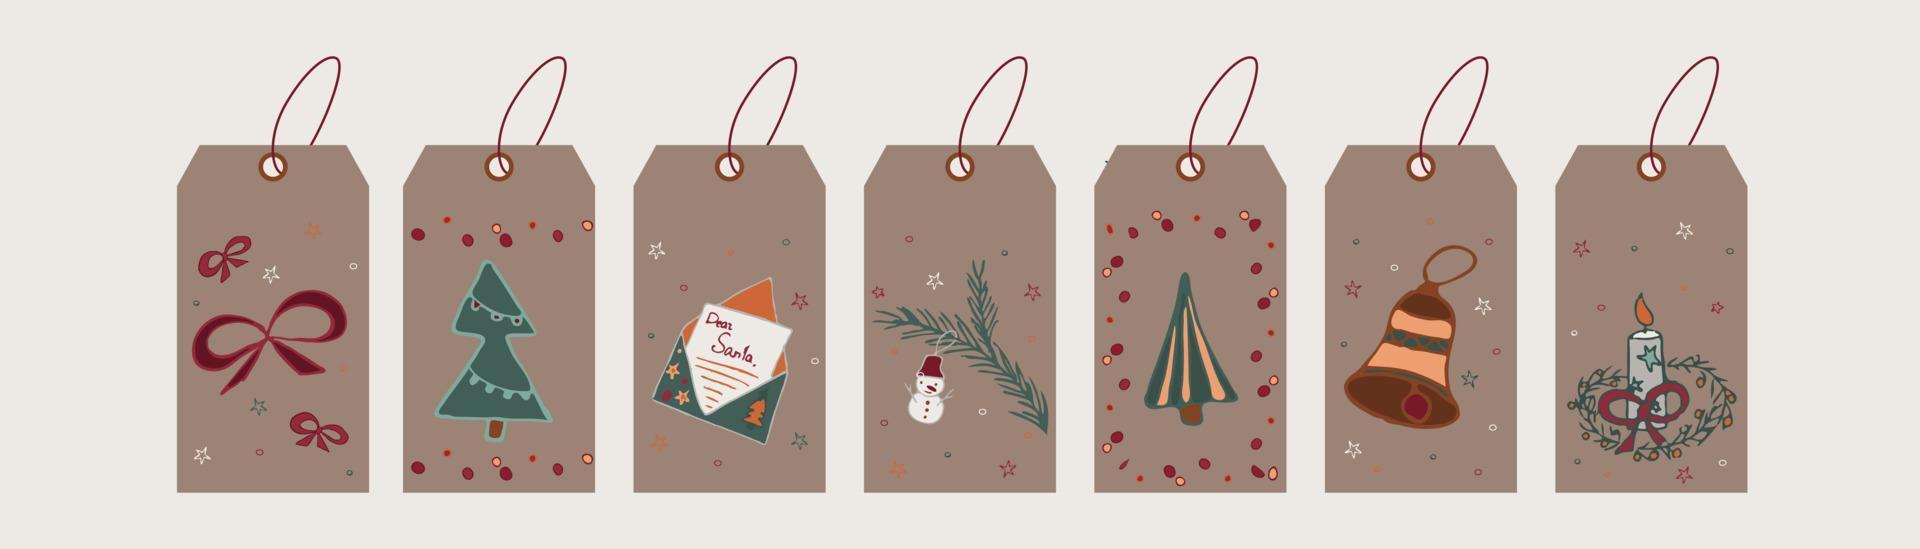 Hand drawn Chistmas hang tag collection with red bow, snowman on spruce, bell and candle. Open envelope with Santa letter for greeting card decoration for xmas holiday. vector